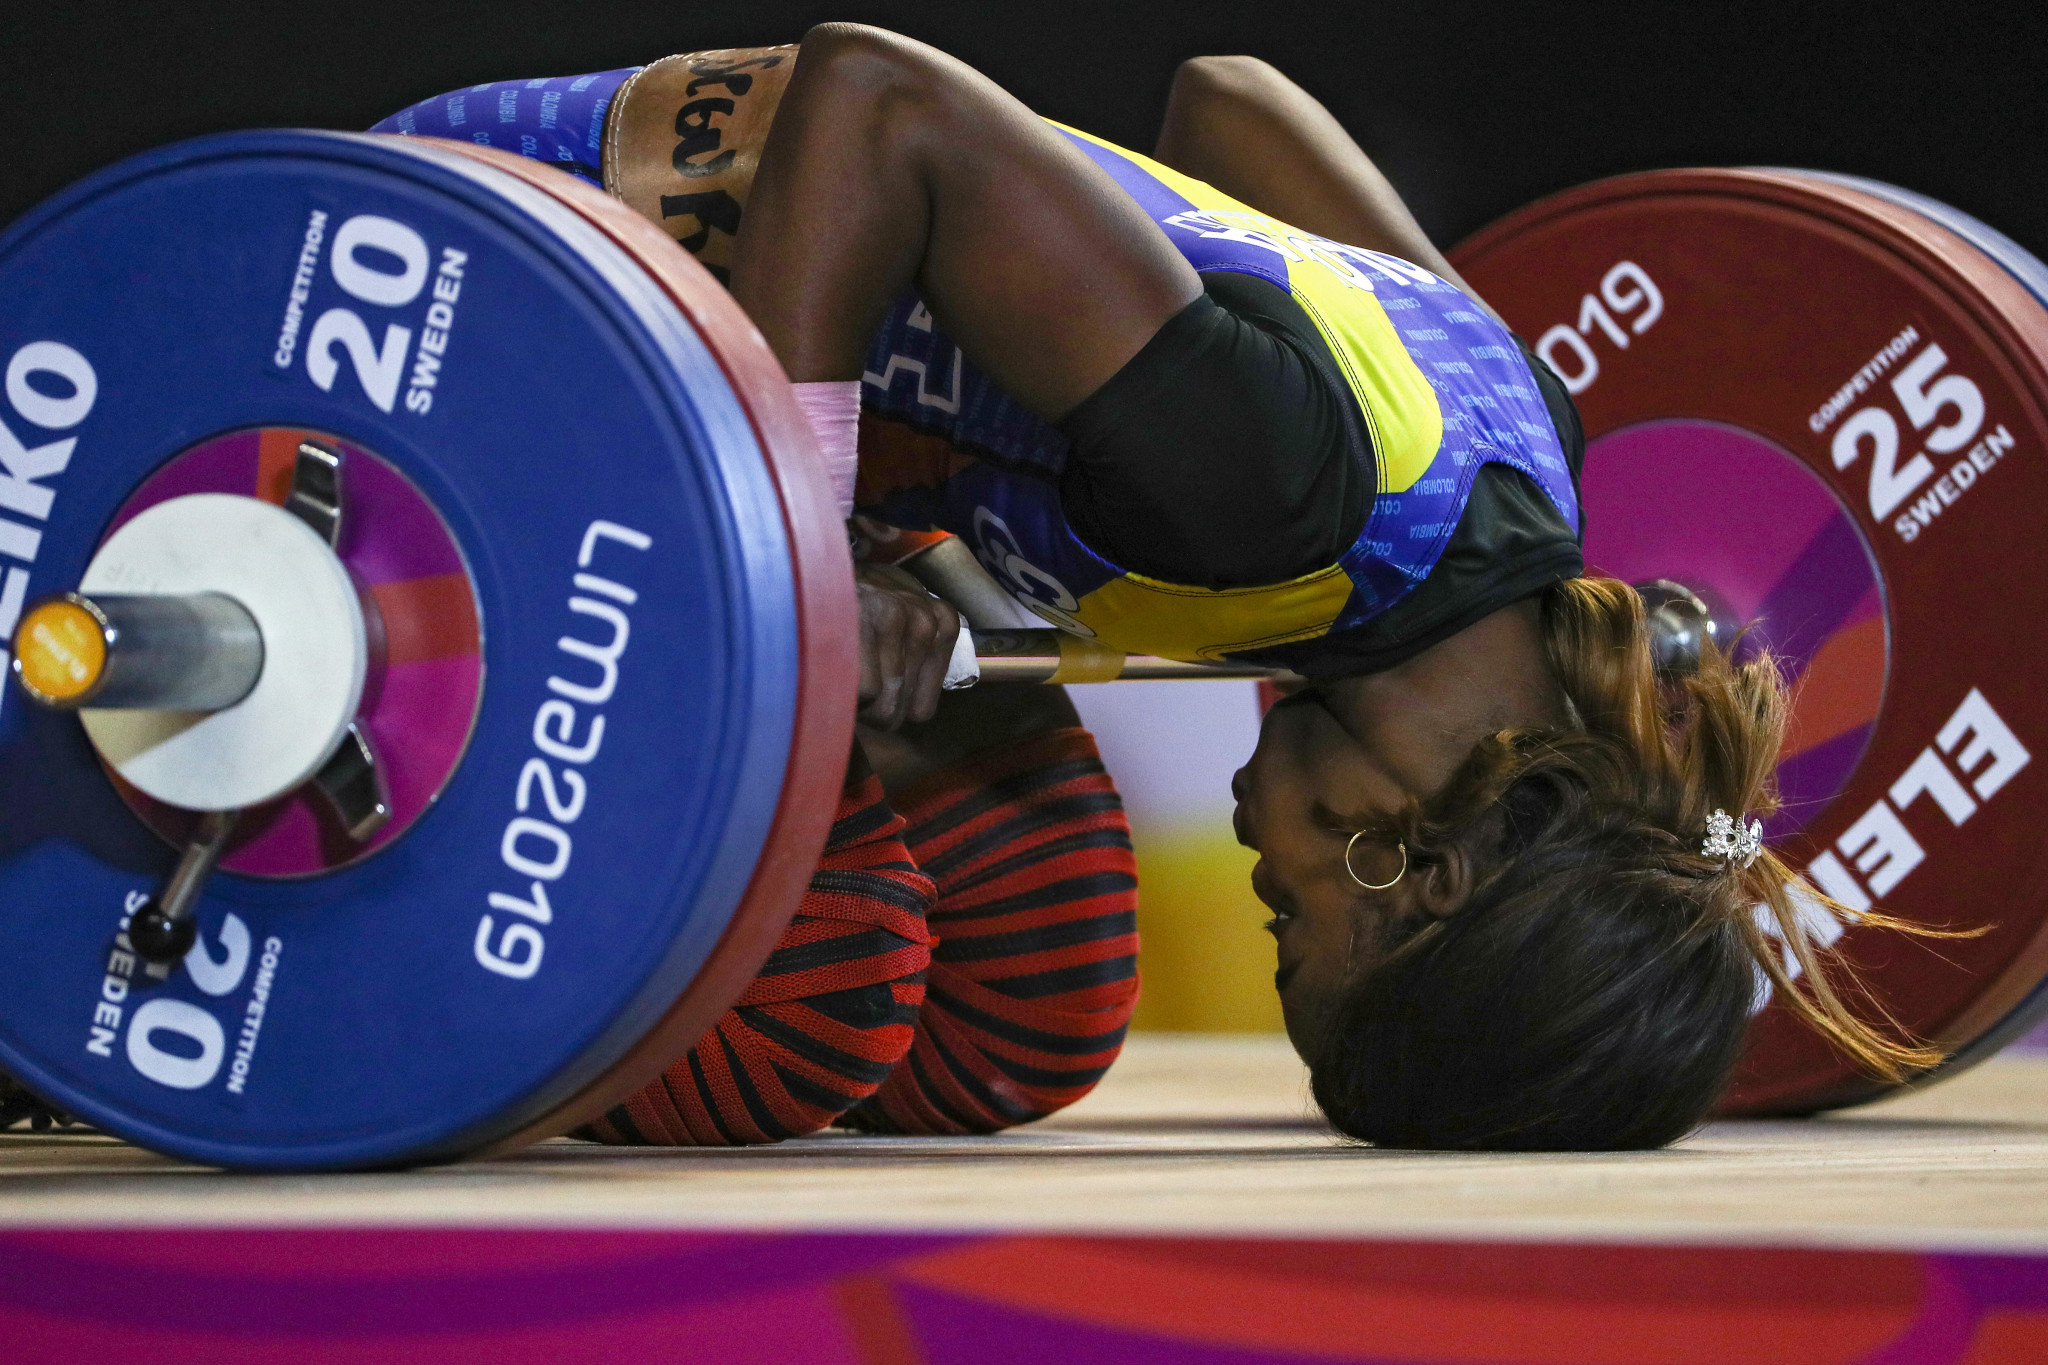 Colombia face prospect of Tokyo 2020 weightlifting ban after three positive tests